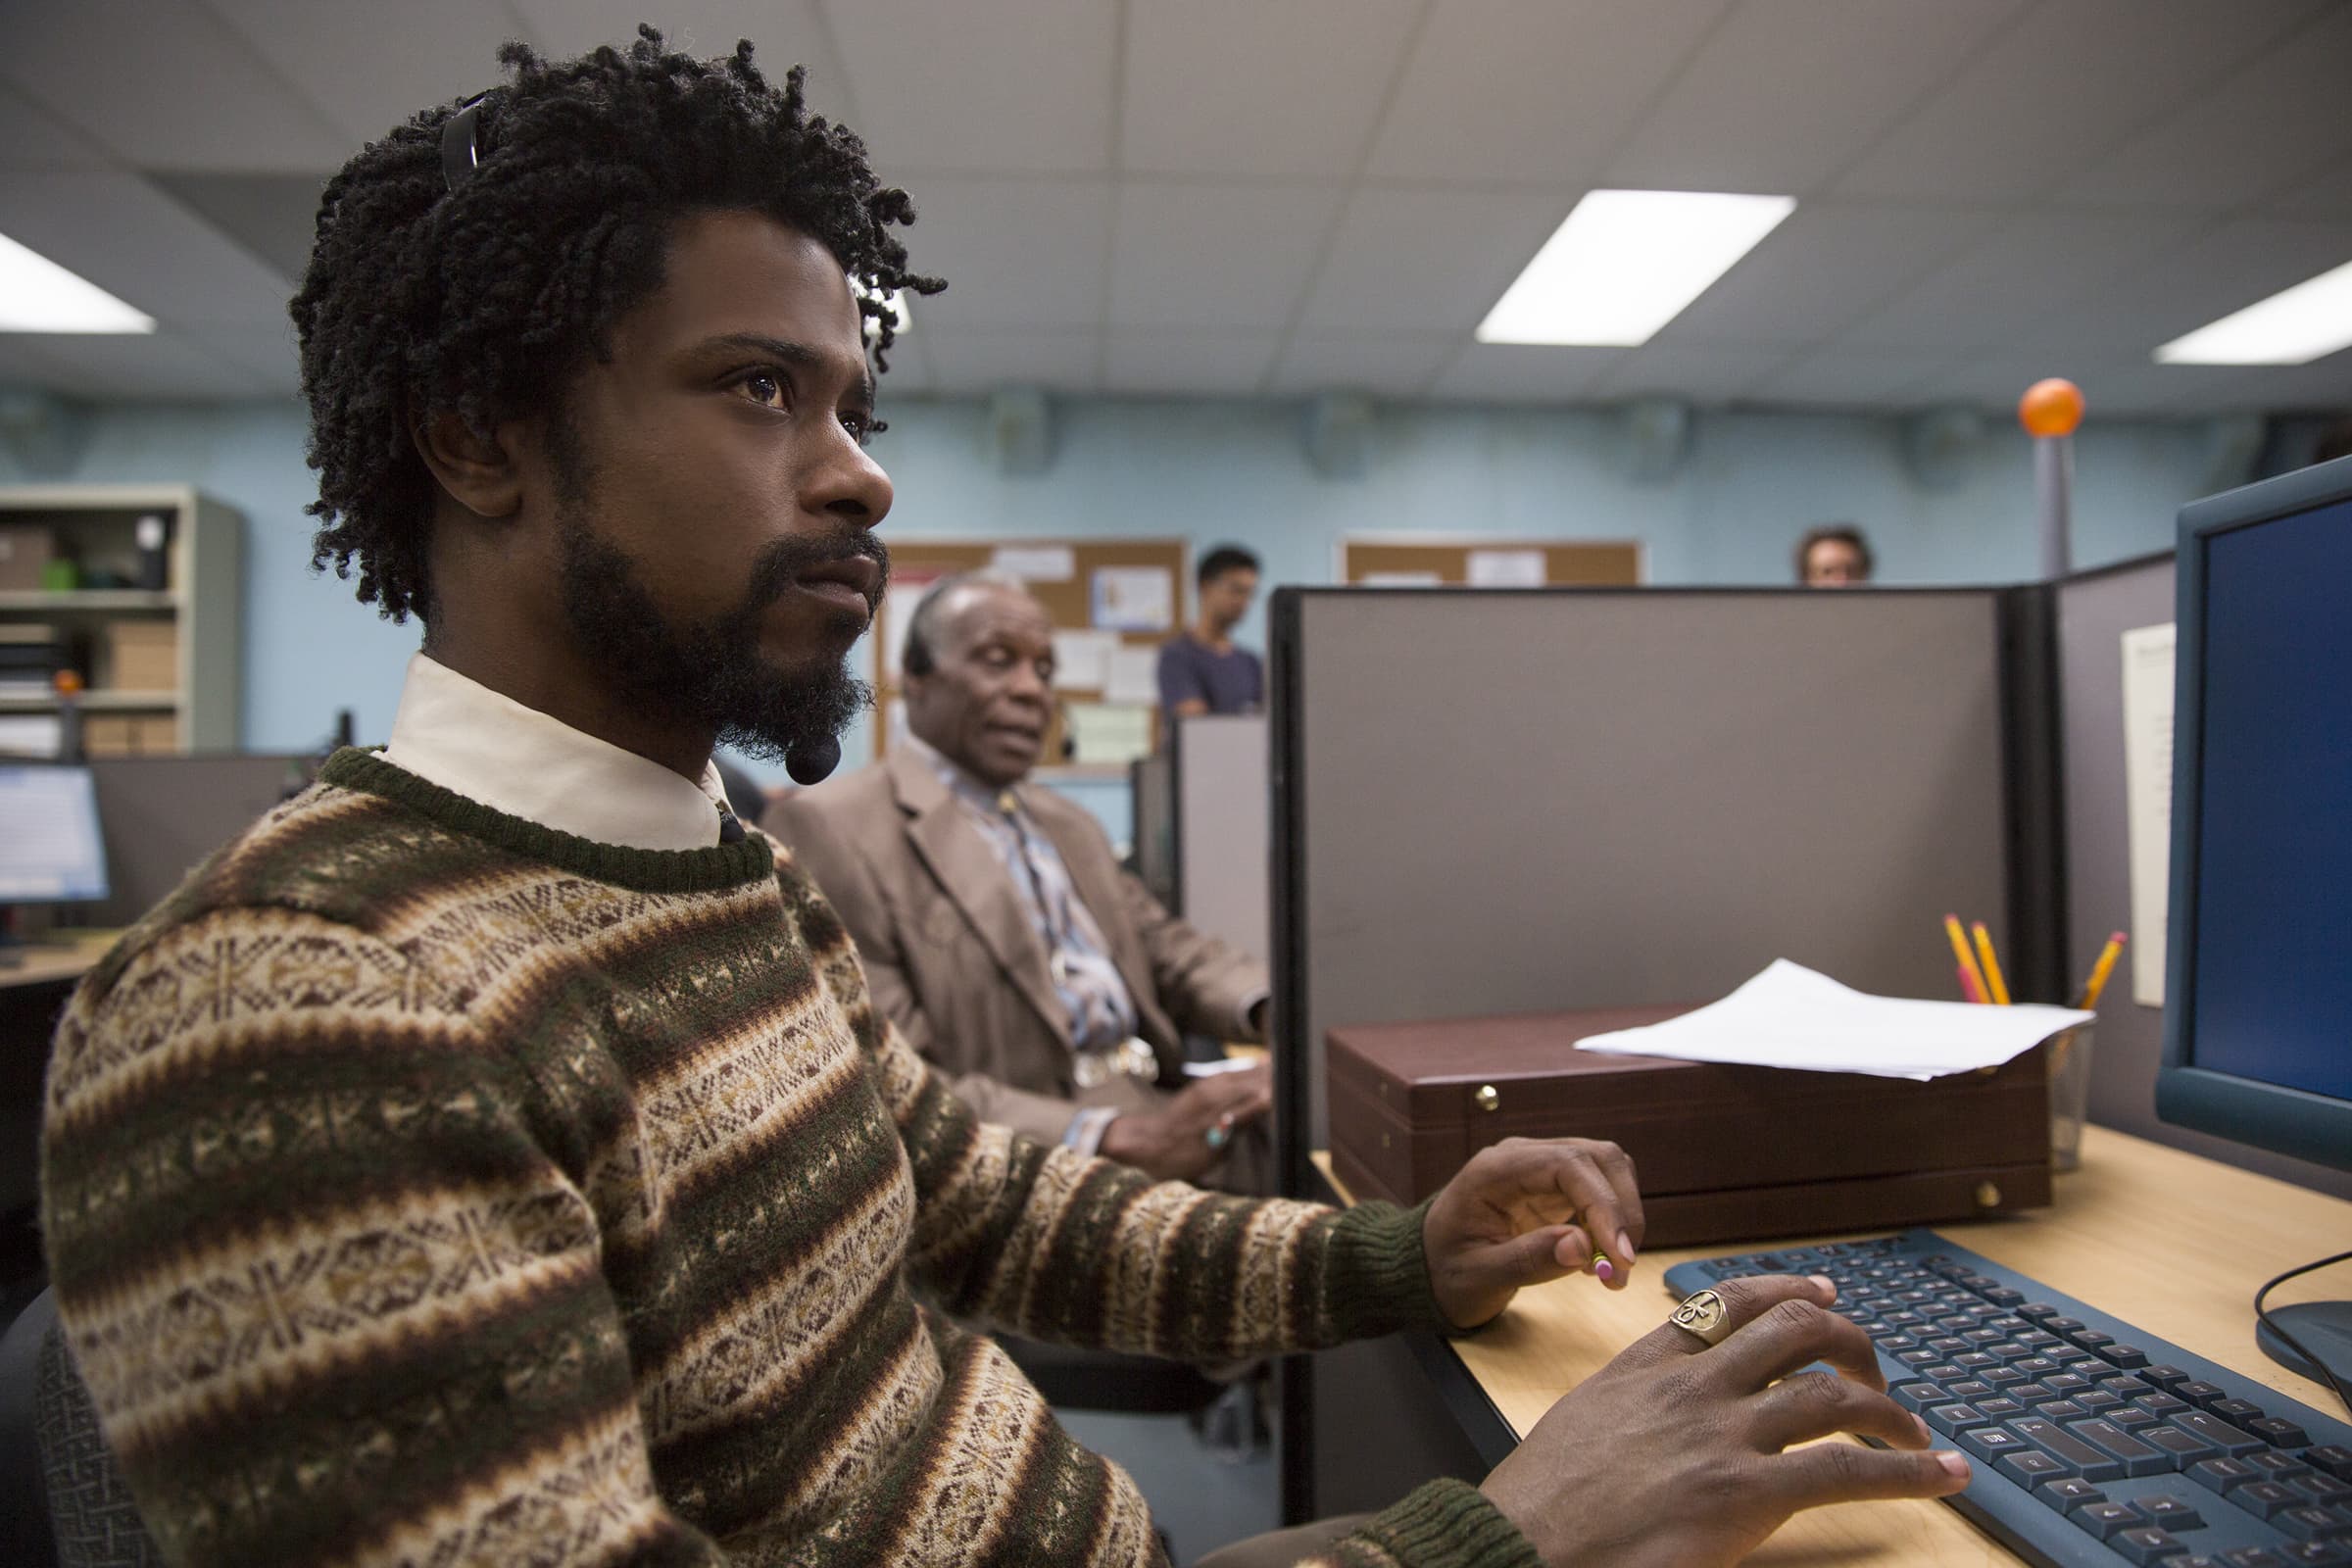 What The Surreal Twist Ending Of Sorry To Bother You Says About America Today The Artery